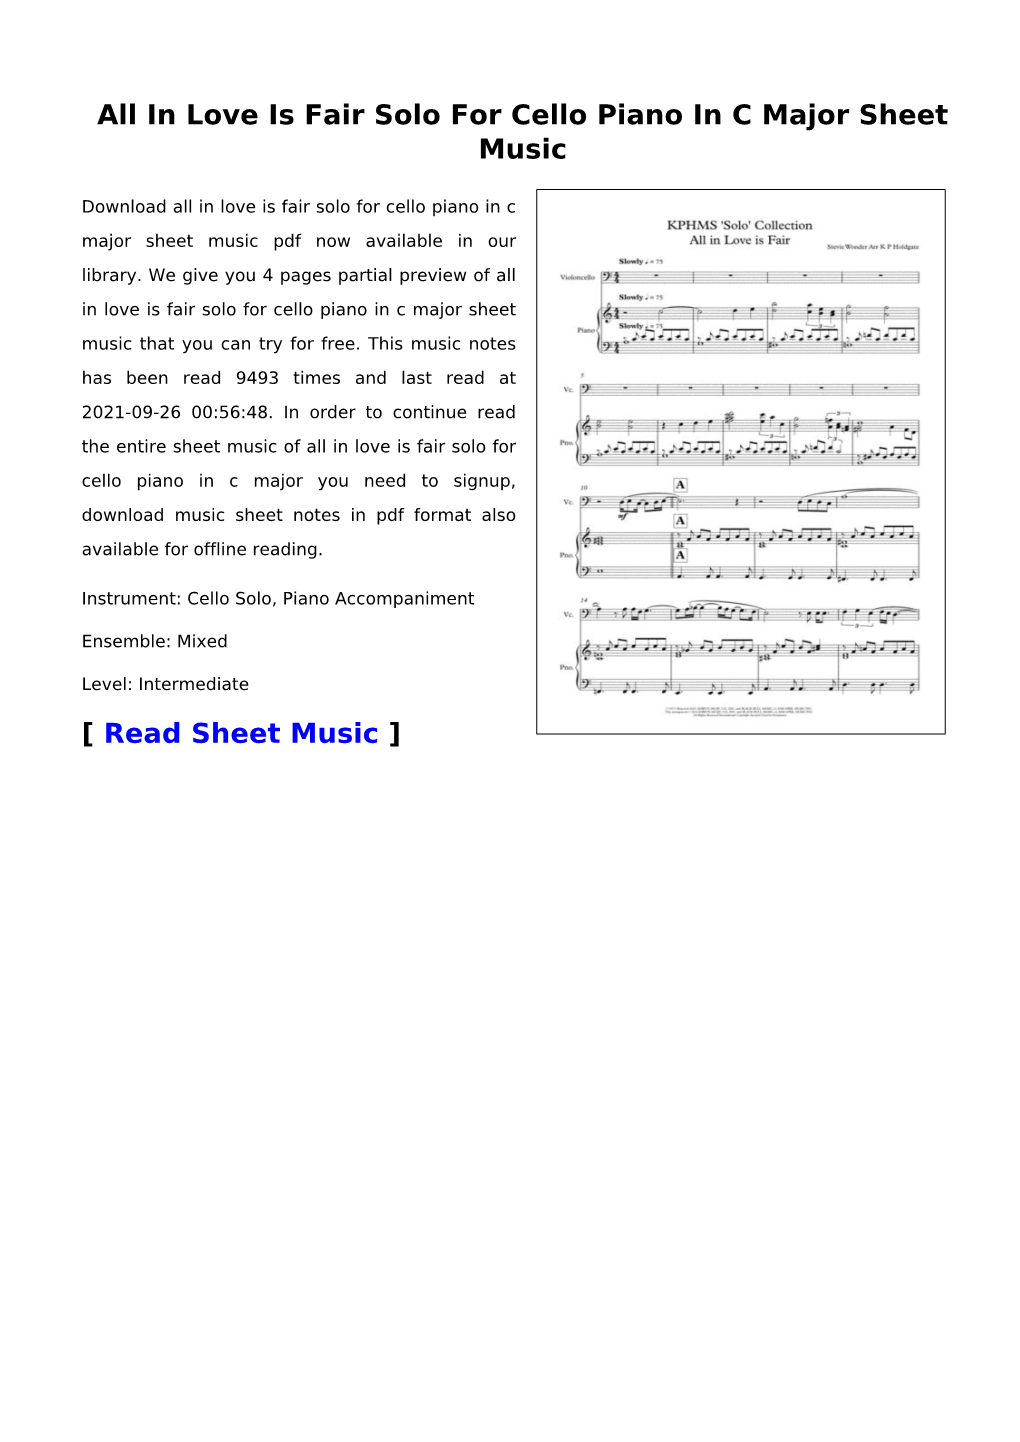 All in Love Is Fair Solo for Cello Piano in C Major Sheet Music